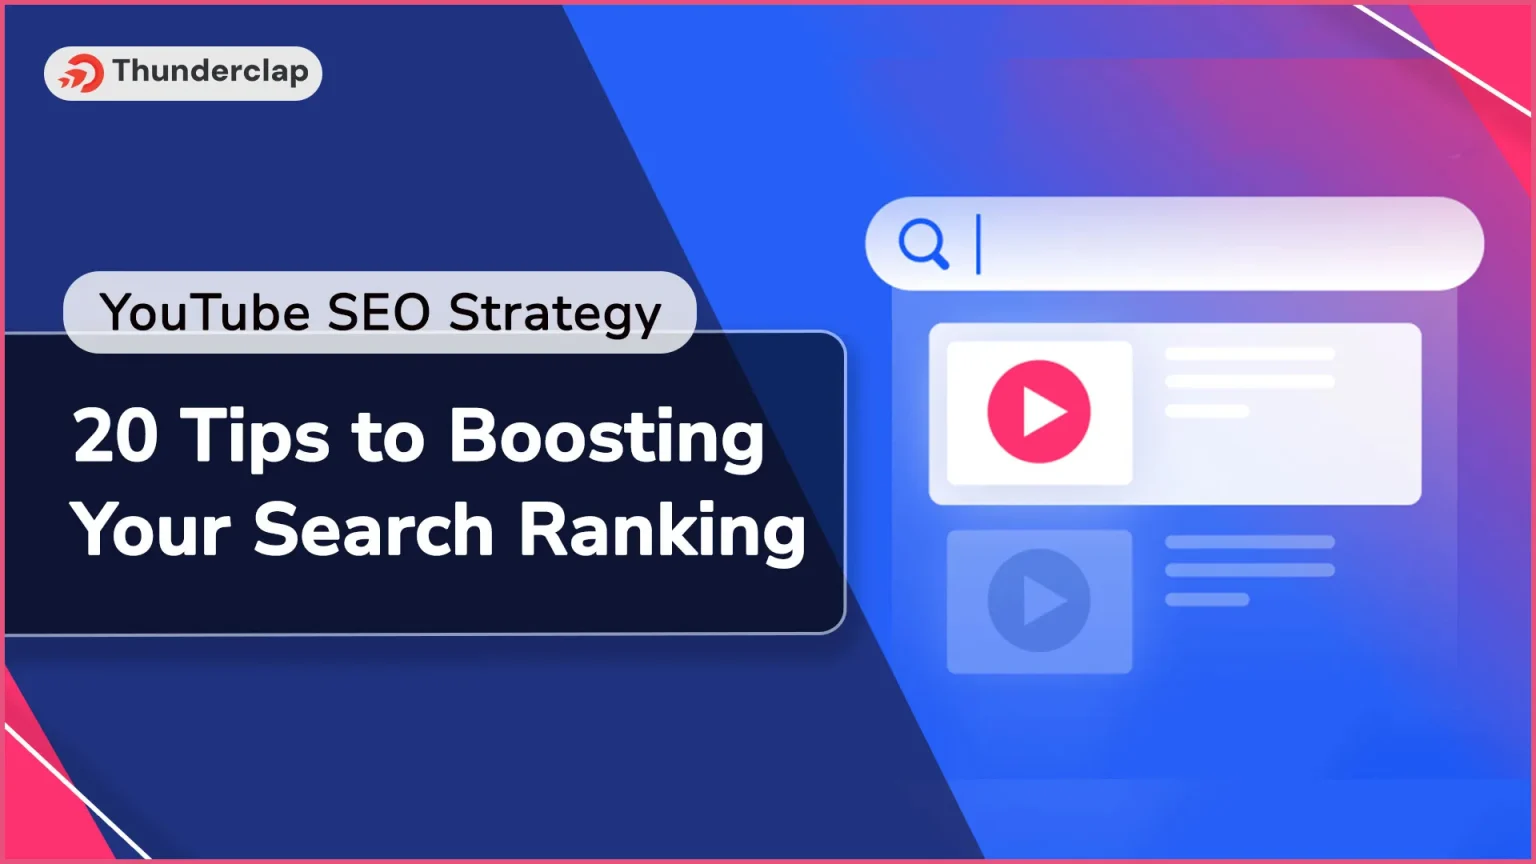 YouTube SEO Strategy: 20 Tips For Boosting Your Search Ranking